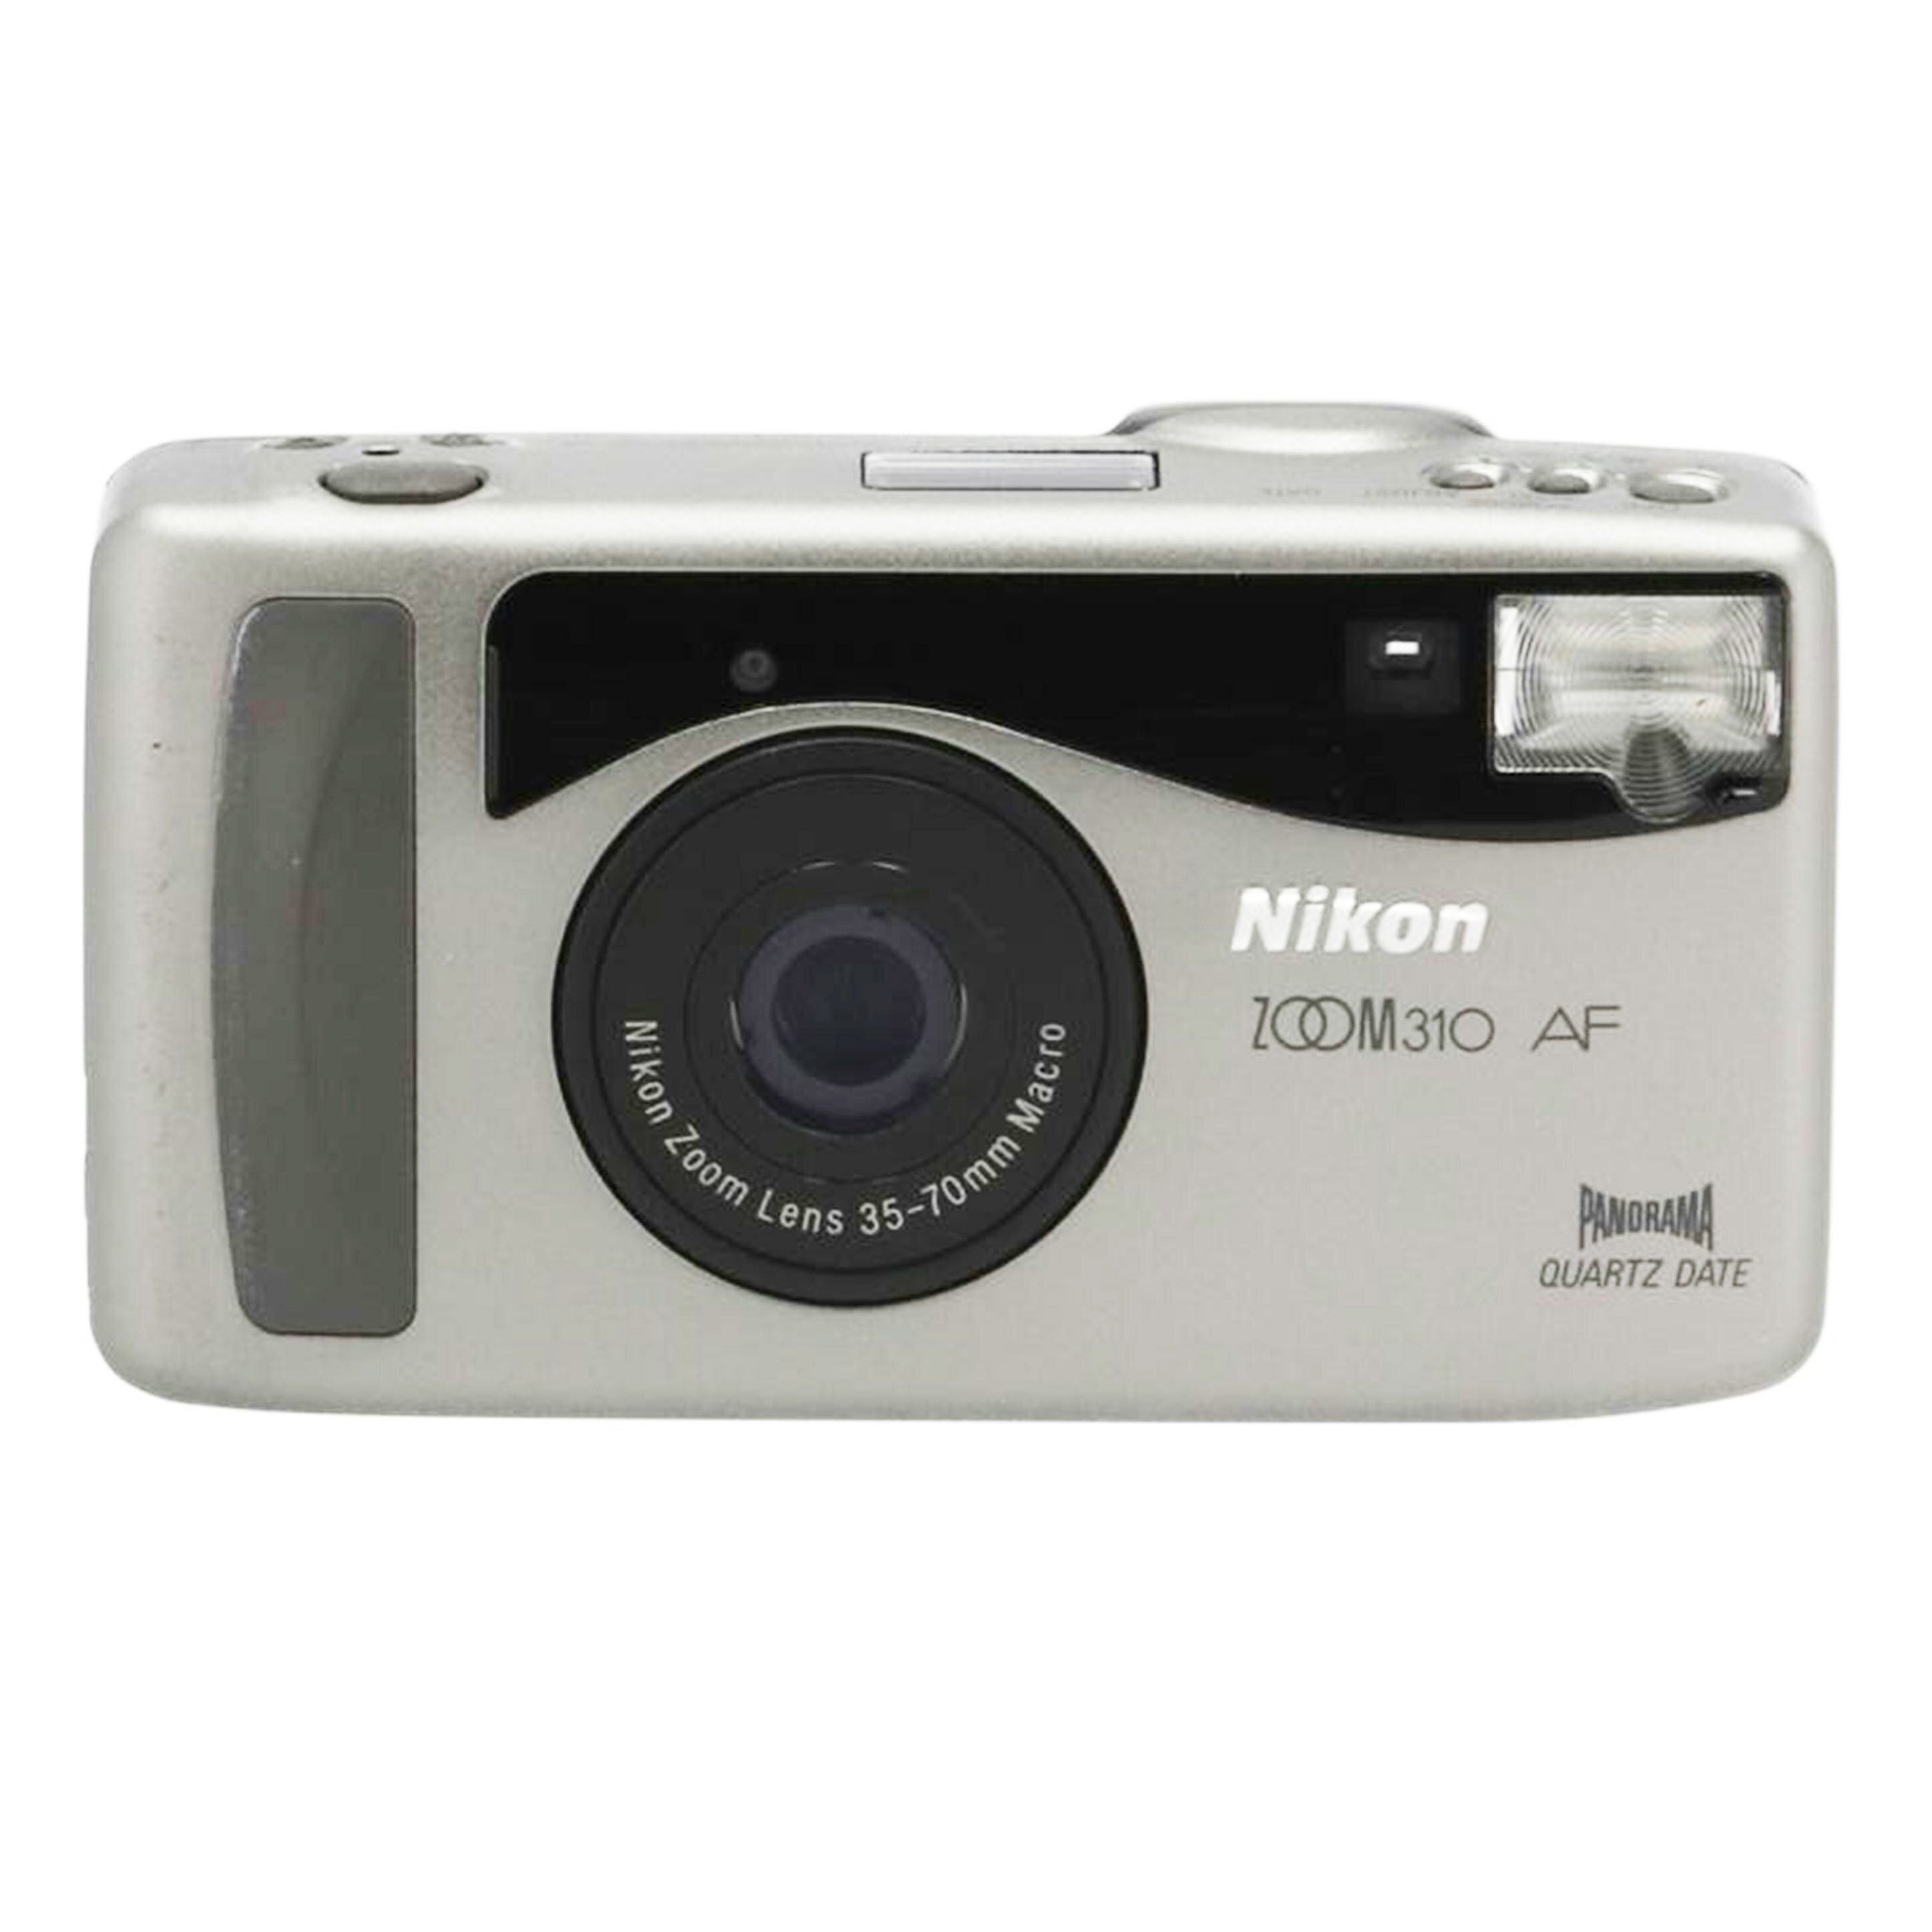 Nikon ニコン/コンパクトフィルムカメラ/ZOOM 310 AF/4108145/Bランク/84【中古】